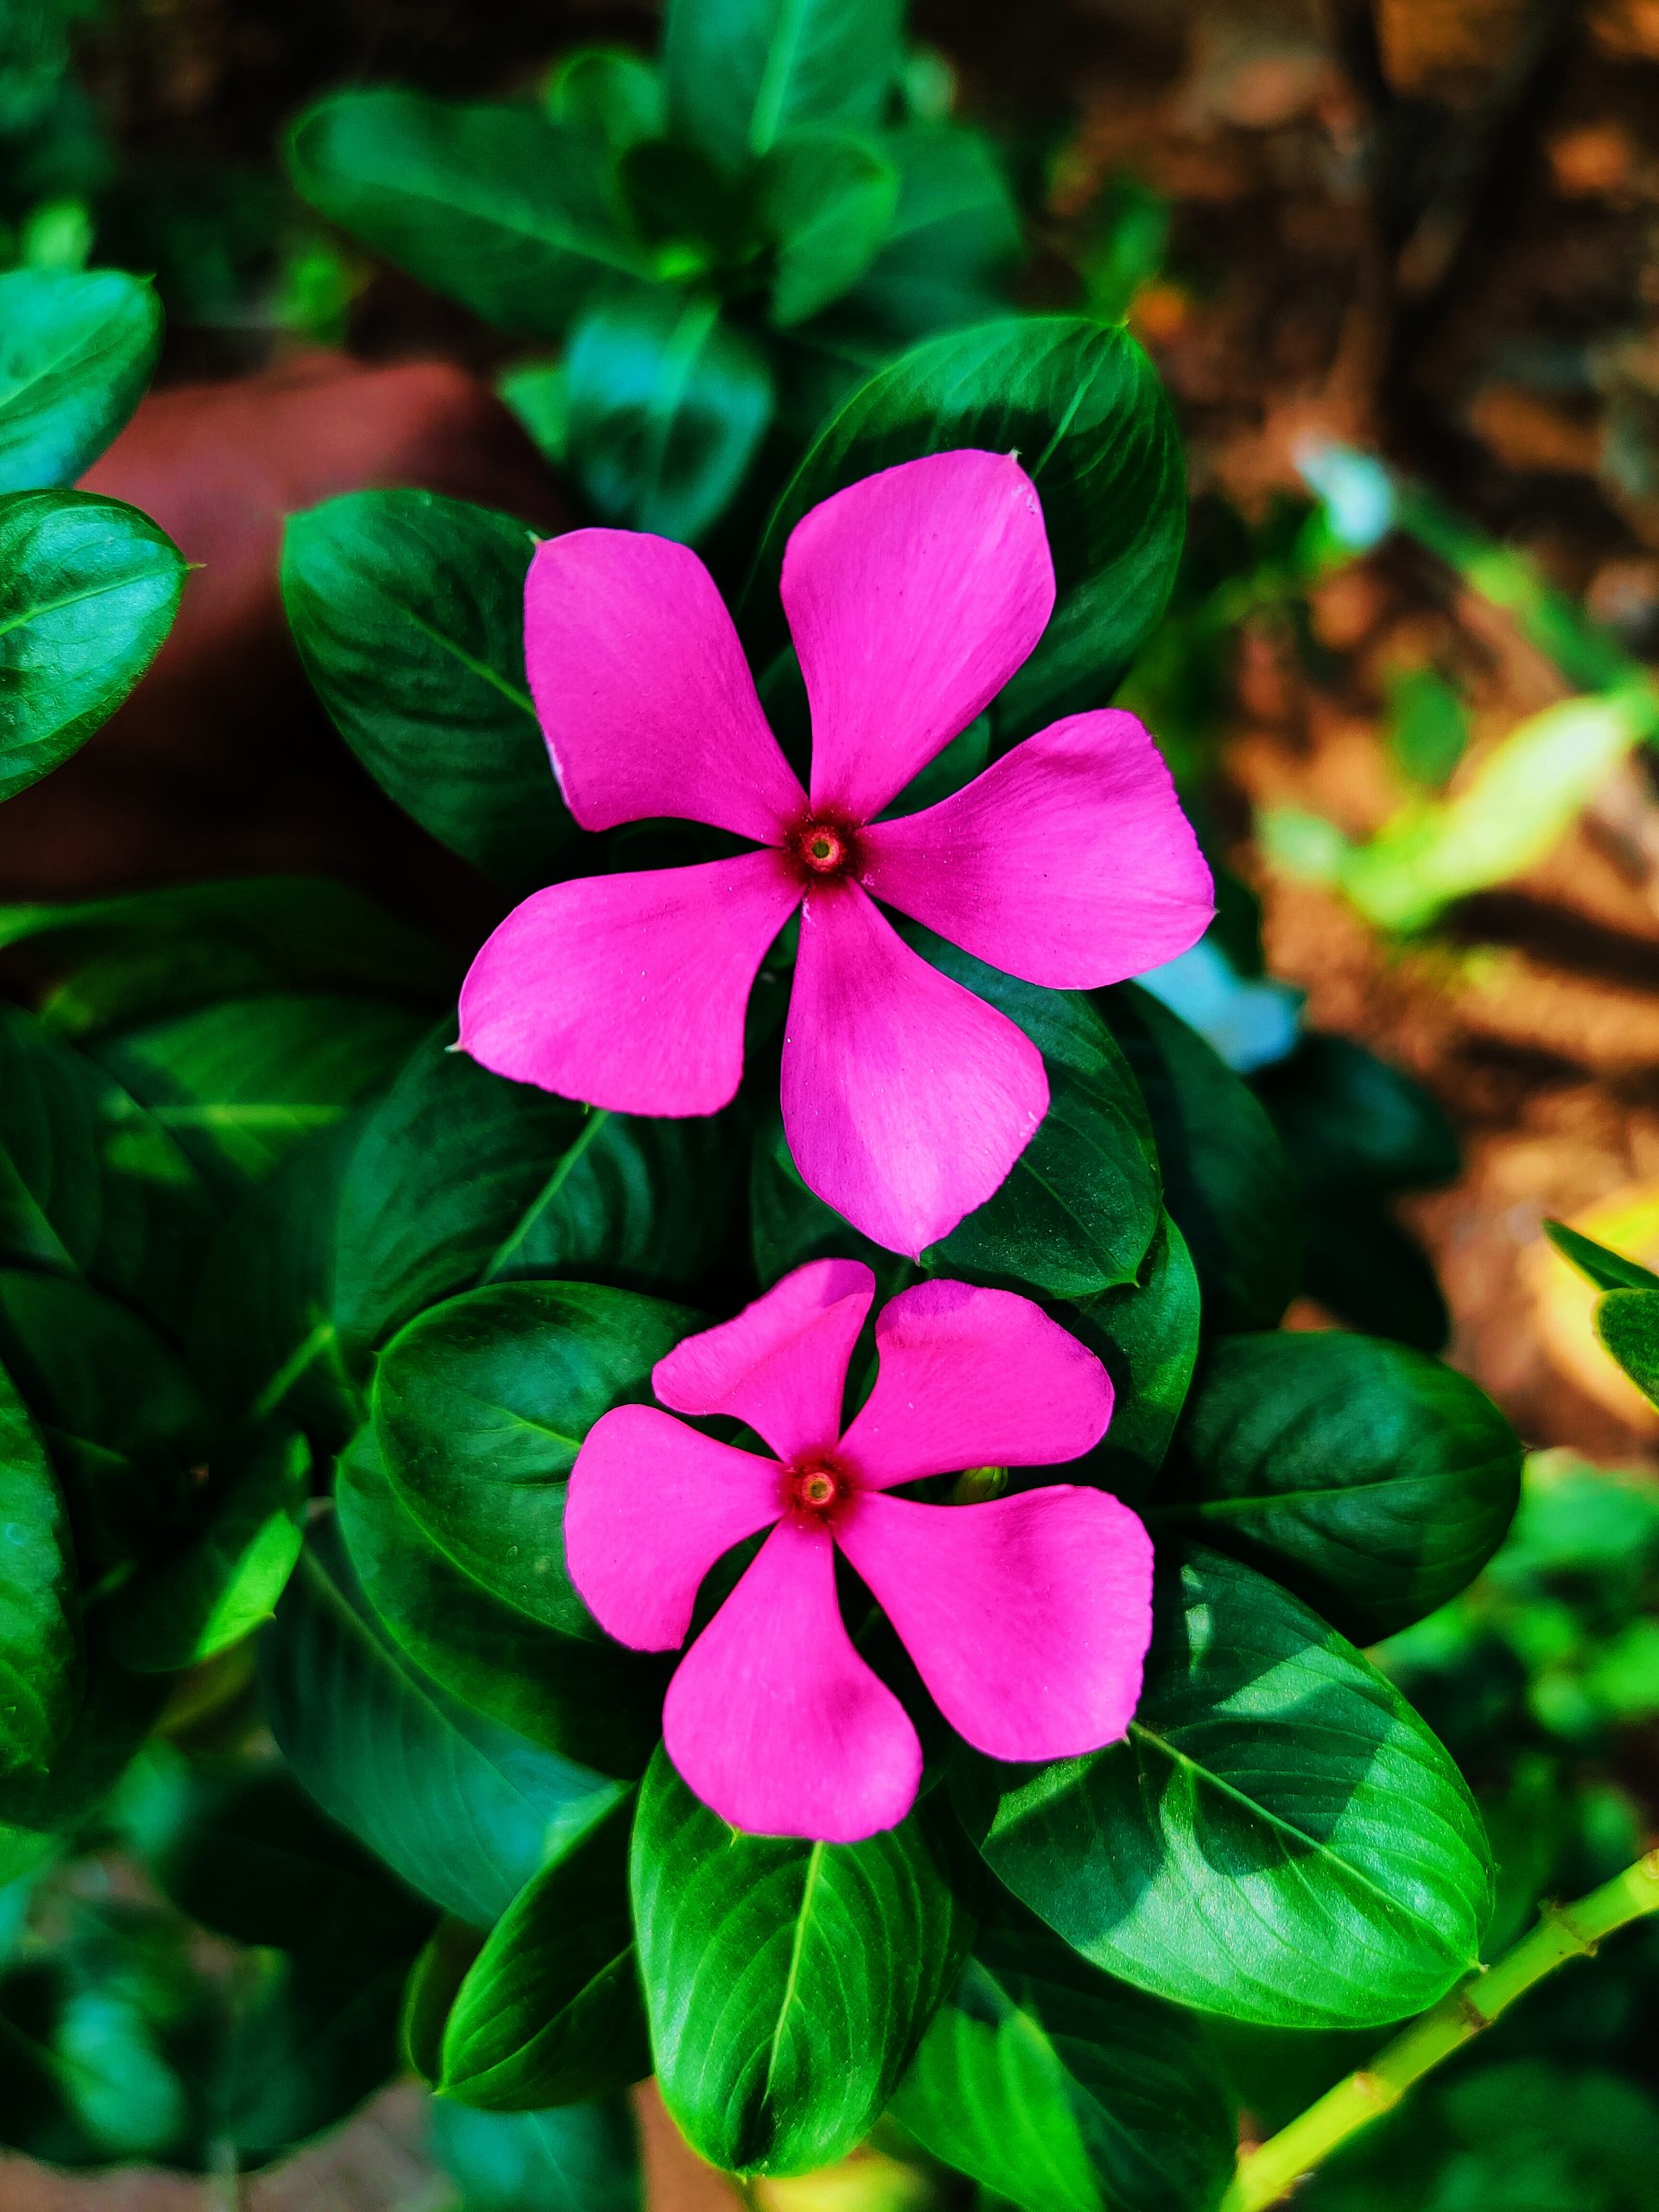 Pink flowers of a plant